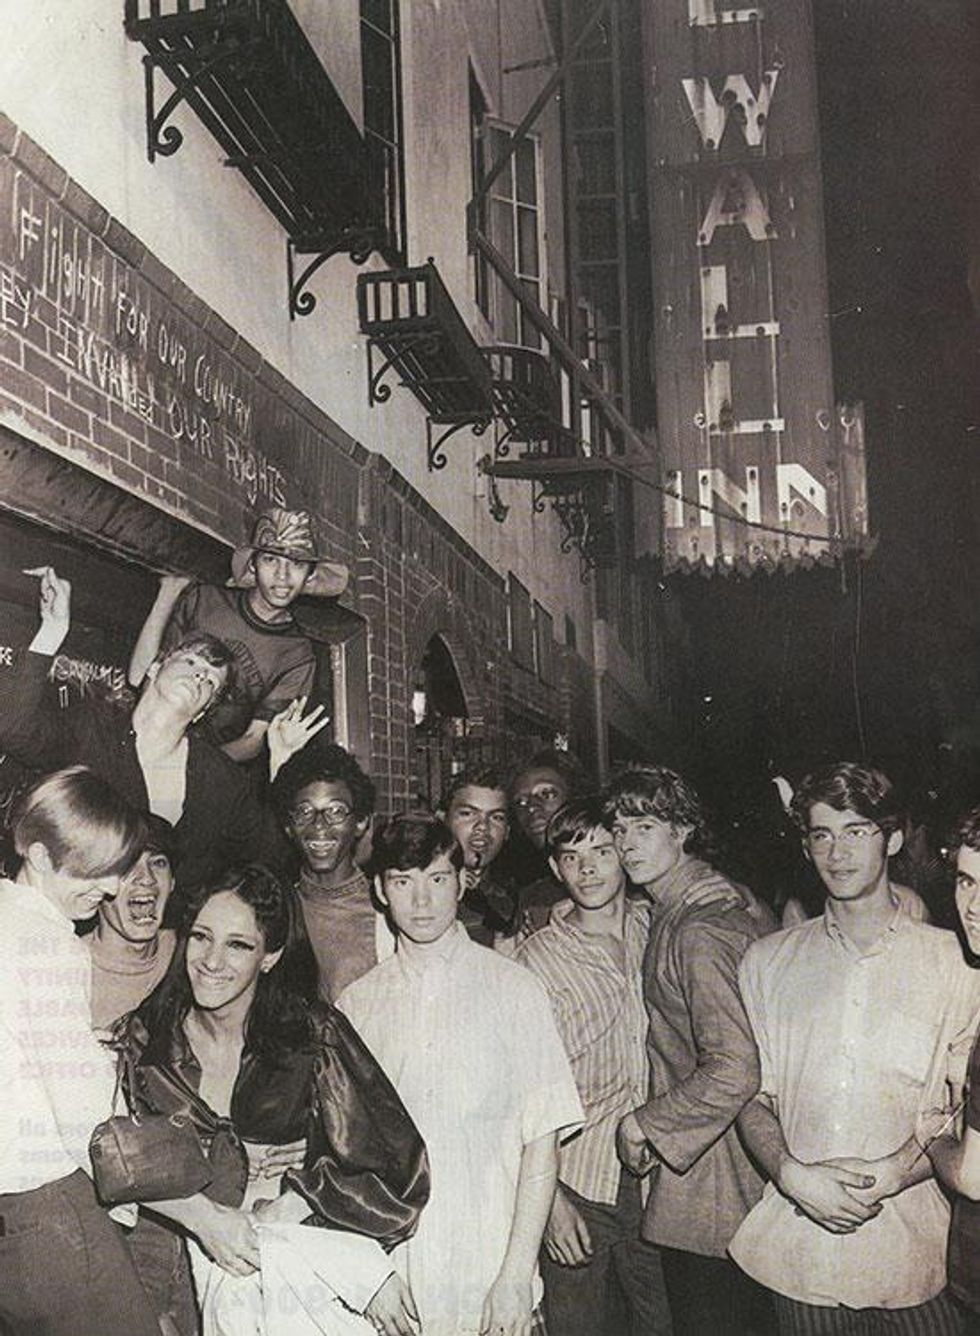 Group gathering at Stonewall Inn, New York City, 1969. Photograph by Fred W. McDarrah. Courtesy of the ONE Archives at USC Libraries. \u00a9 Estate of Fred W. McDarrah/Getty Images.